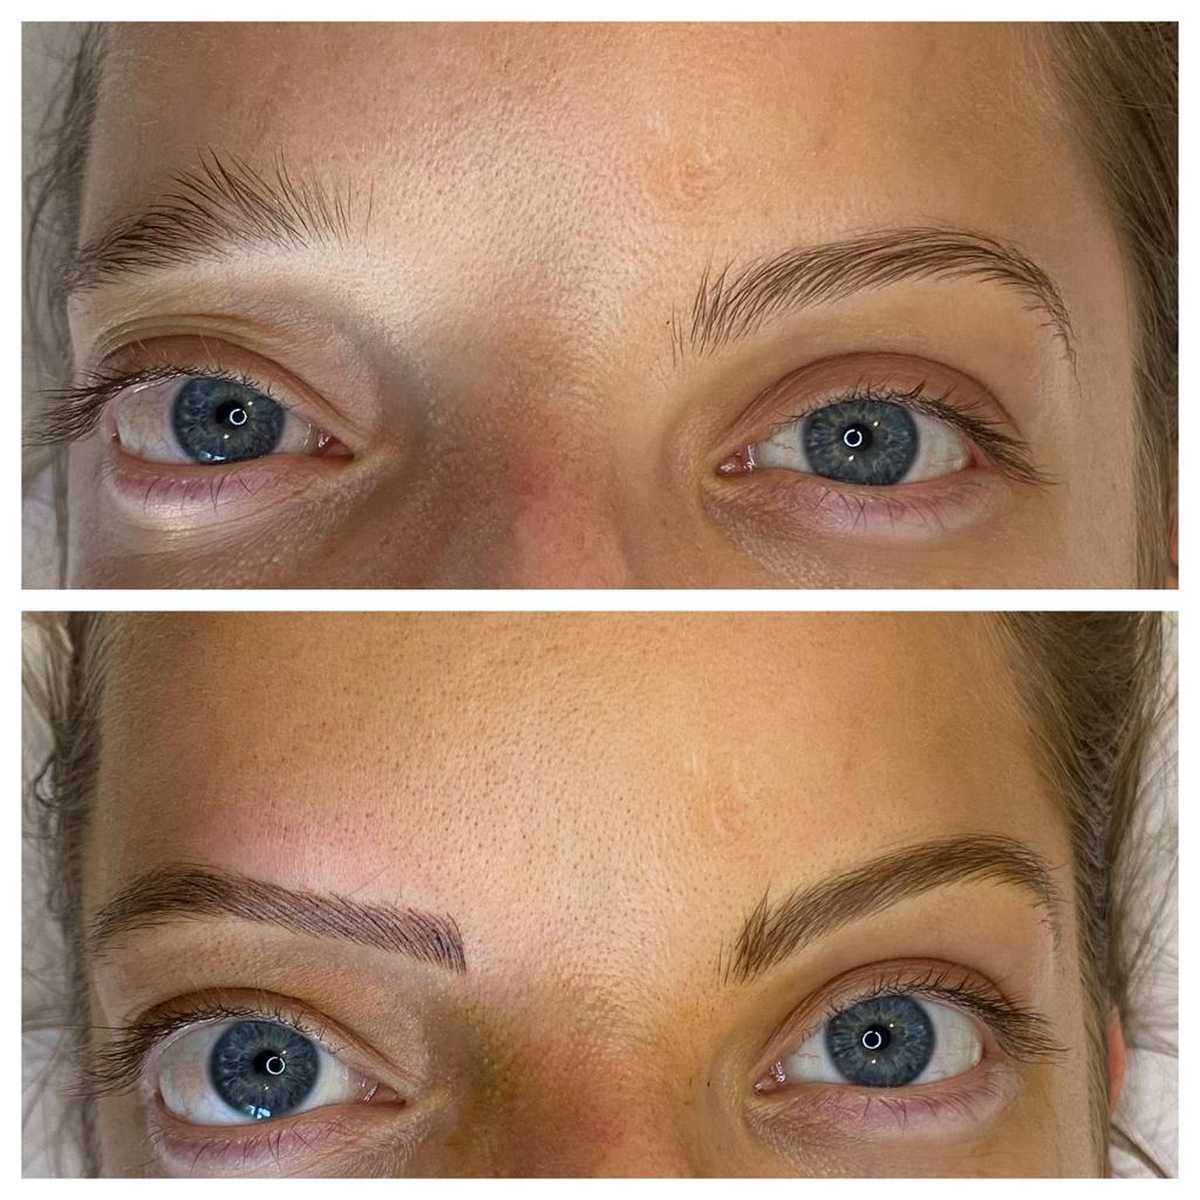 Photograph of Before and After eyebrow microblading